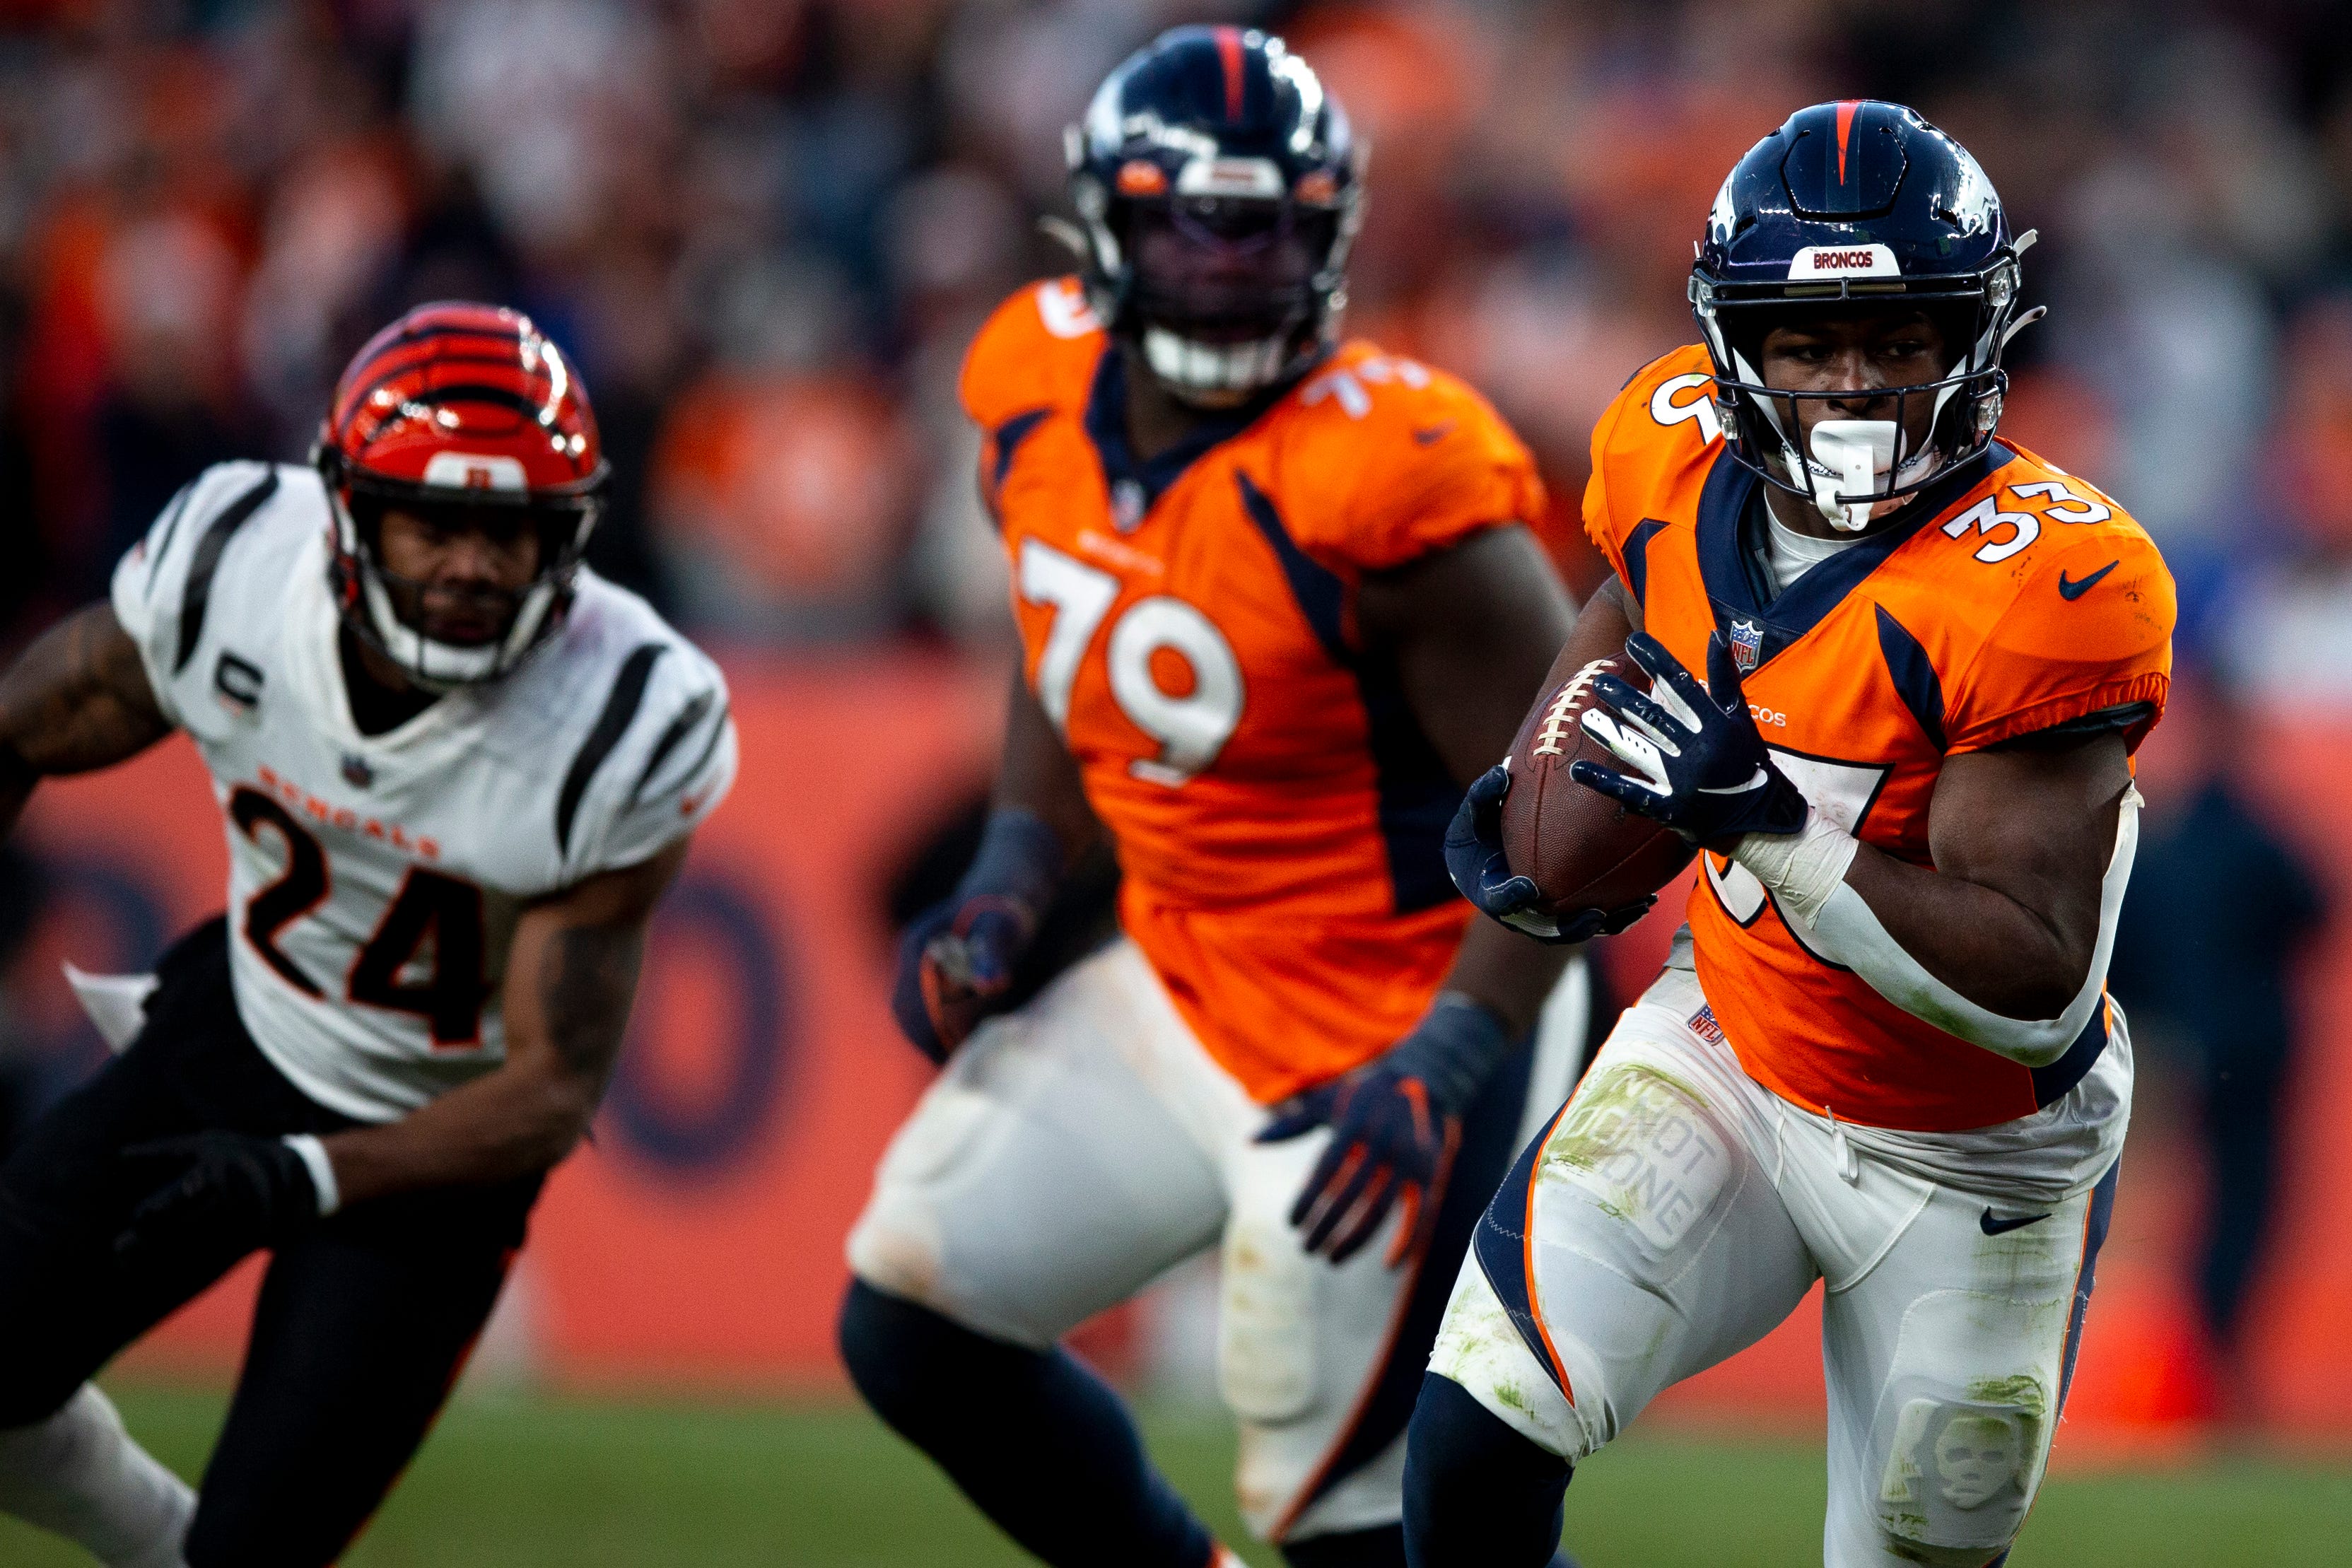 Denver Broncos running back Javonte Williams (33) runs downfield in the second half of the NFL football game on Sunday, Dec. 19, 2021, at Empower Field in Denver. Cincinnati defeated the Broncos 15-10.